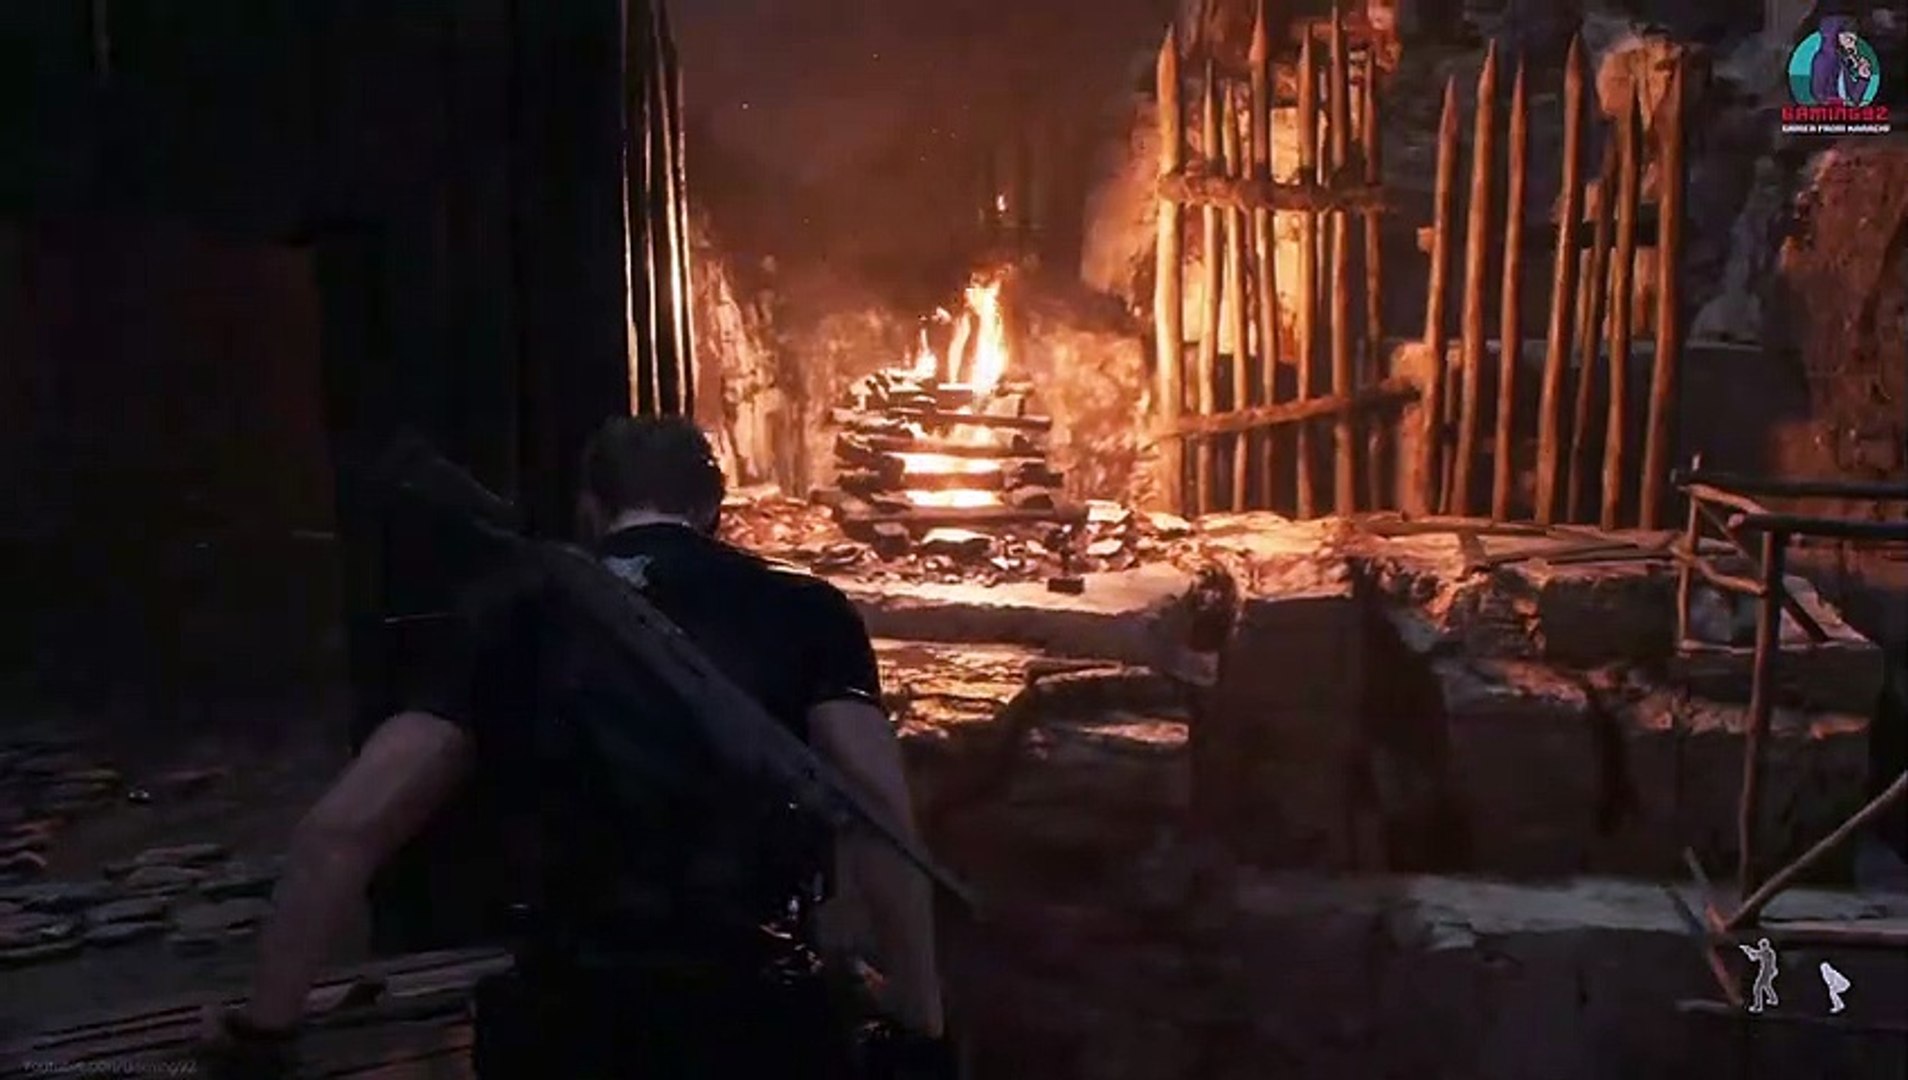 PS5) Resident Evil 4 Remake WILL BE INSANE  Realistic ULTRA Graphics  Gameplay [4K 60FPS HDR] 